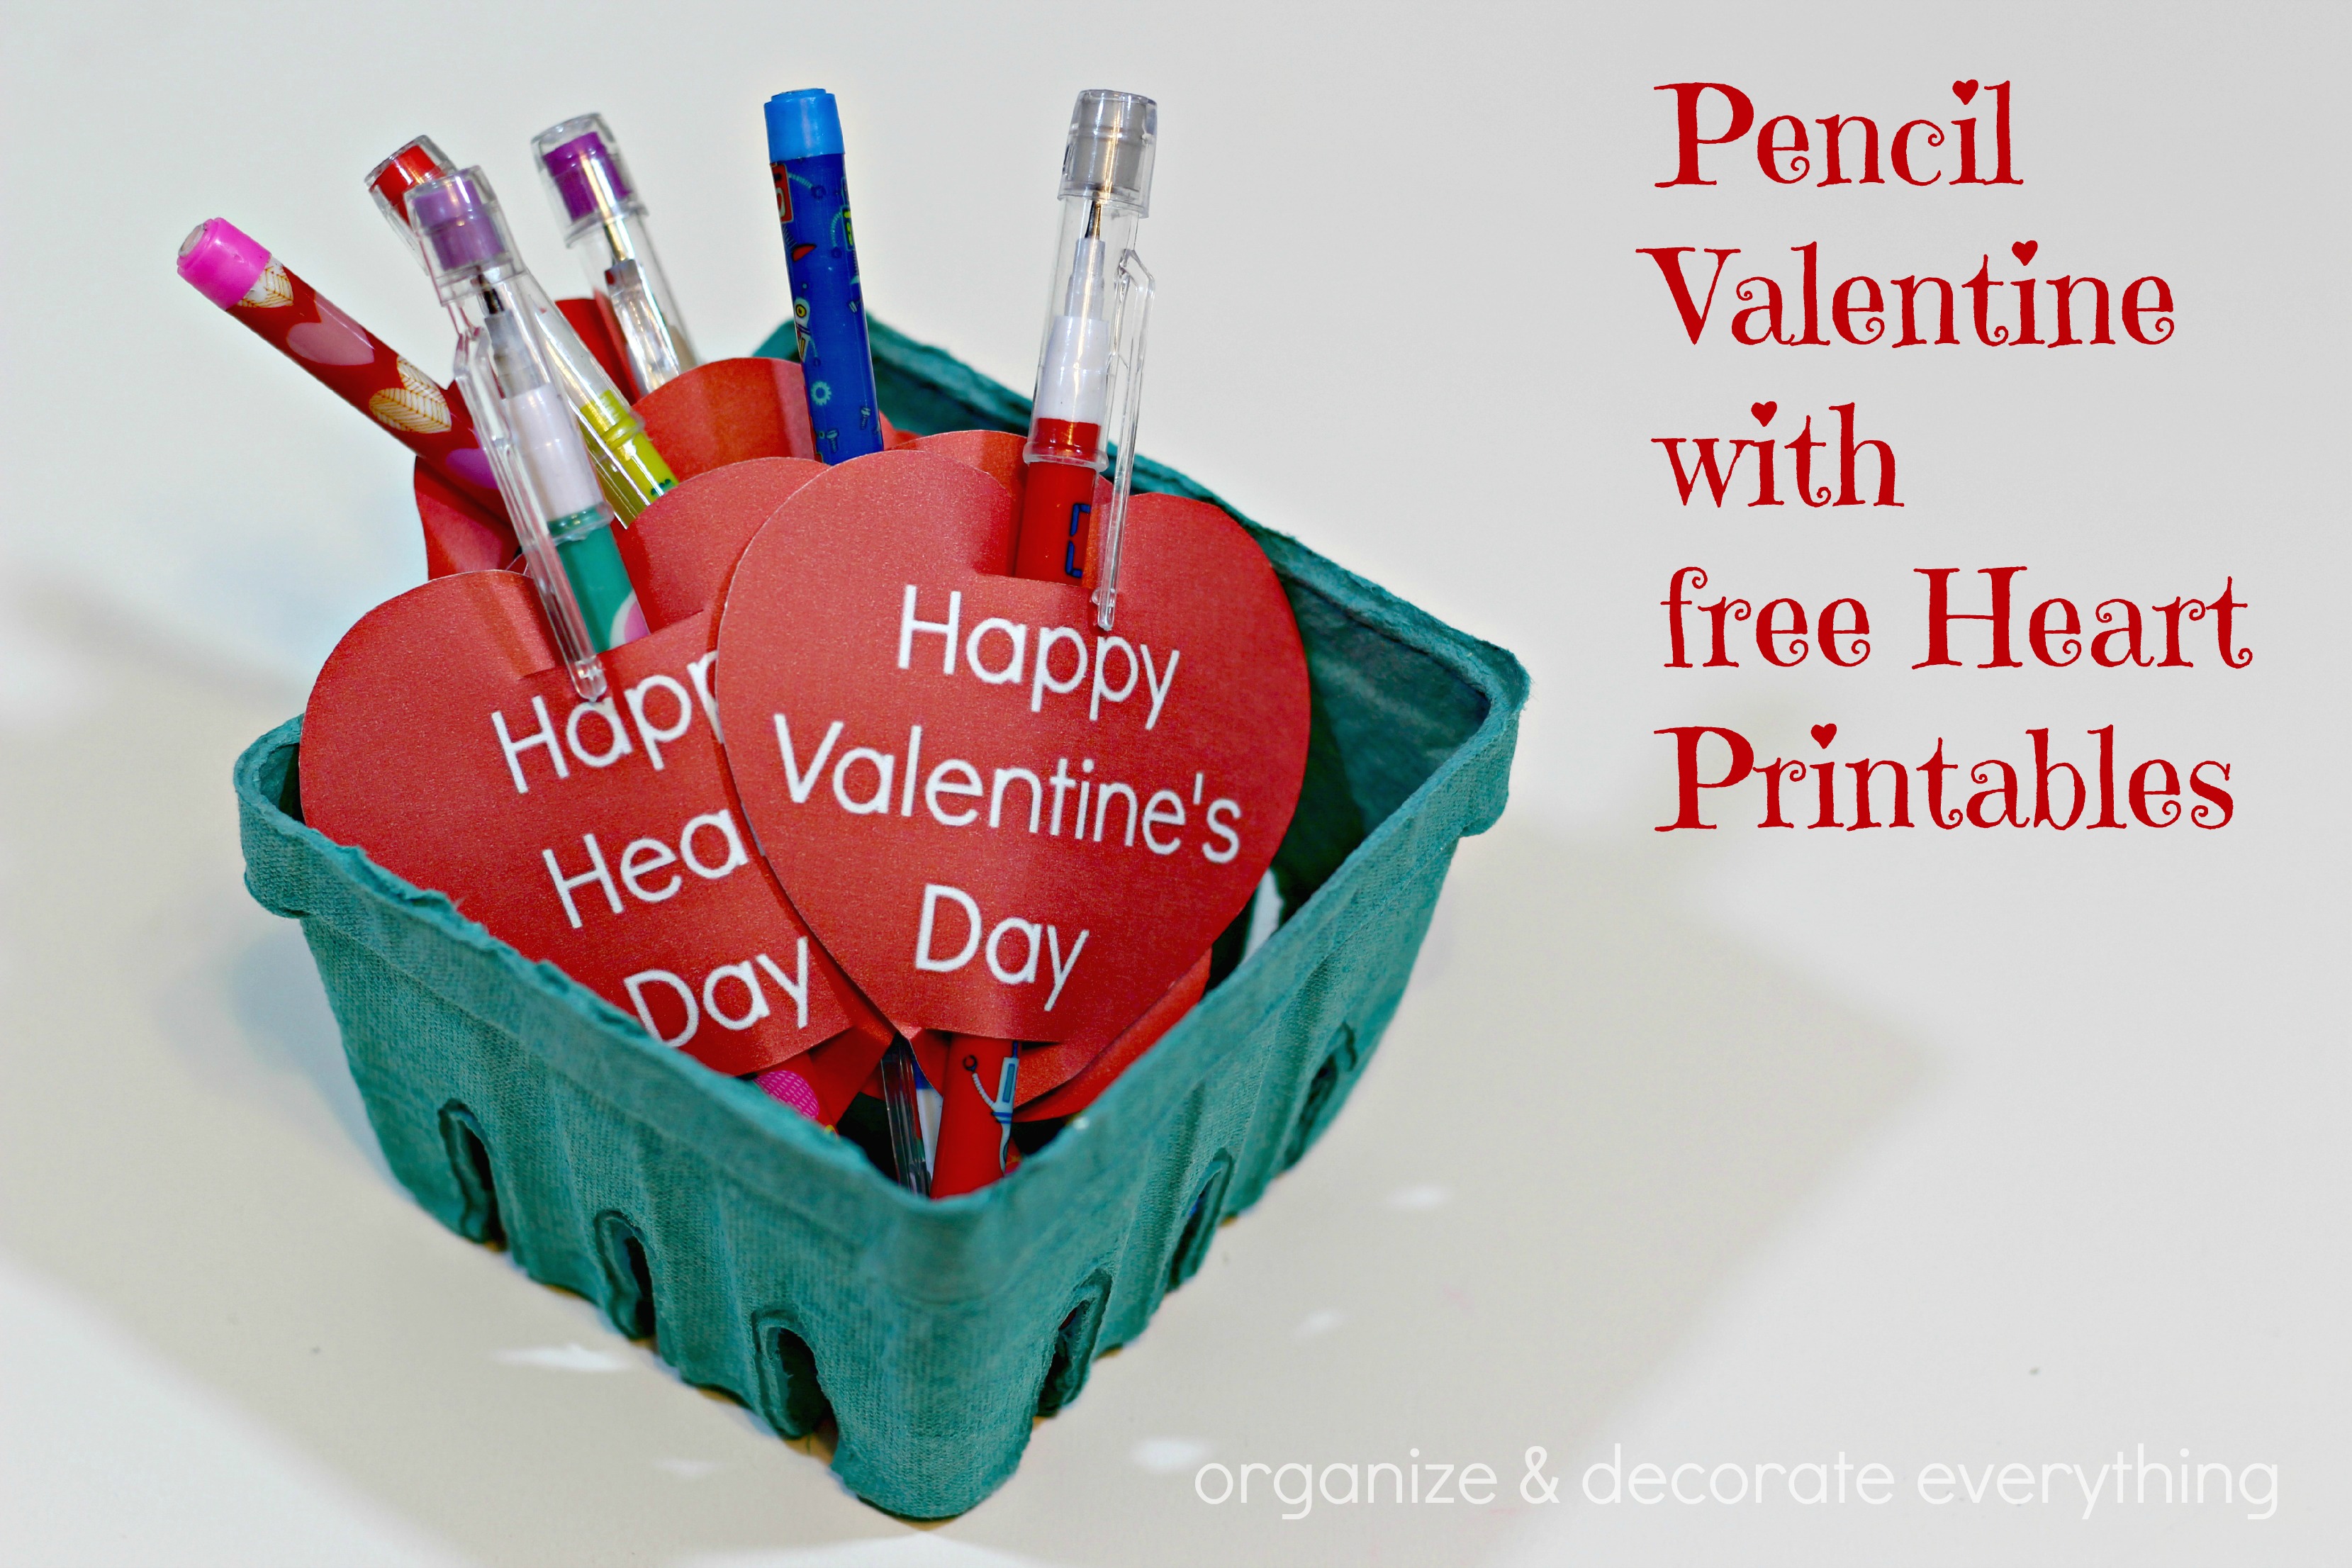 pencil-valentine-with-free-heart-printables-organize-and-decorate